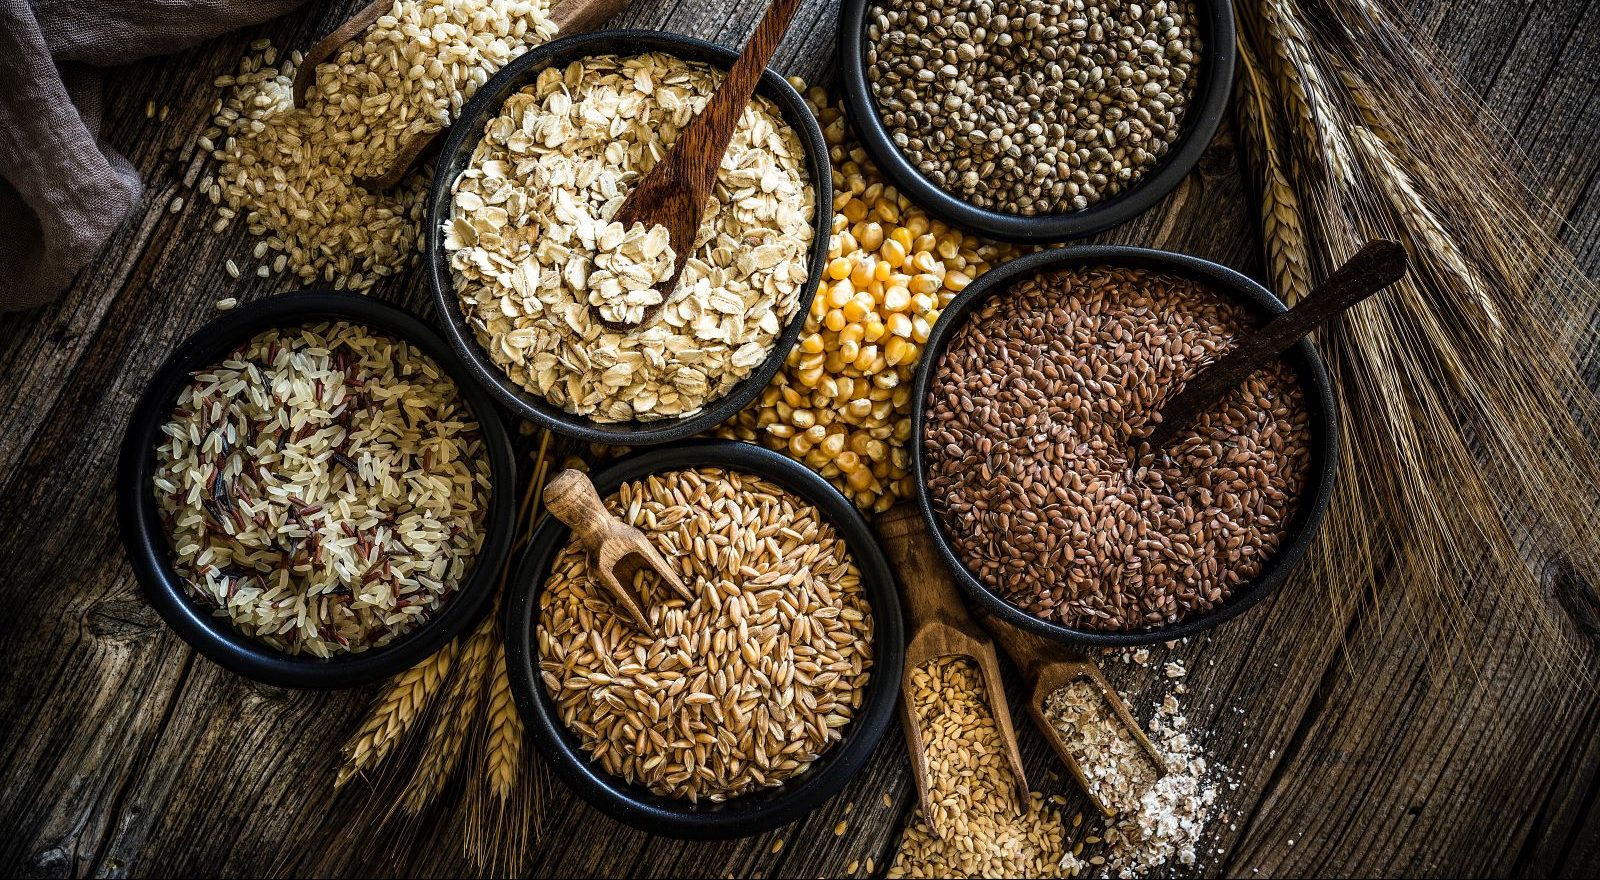 In the world of healthy eating, no phrase is thrown around more than “whole grains.” But what are they? And why do we want to eat them?